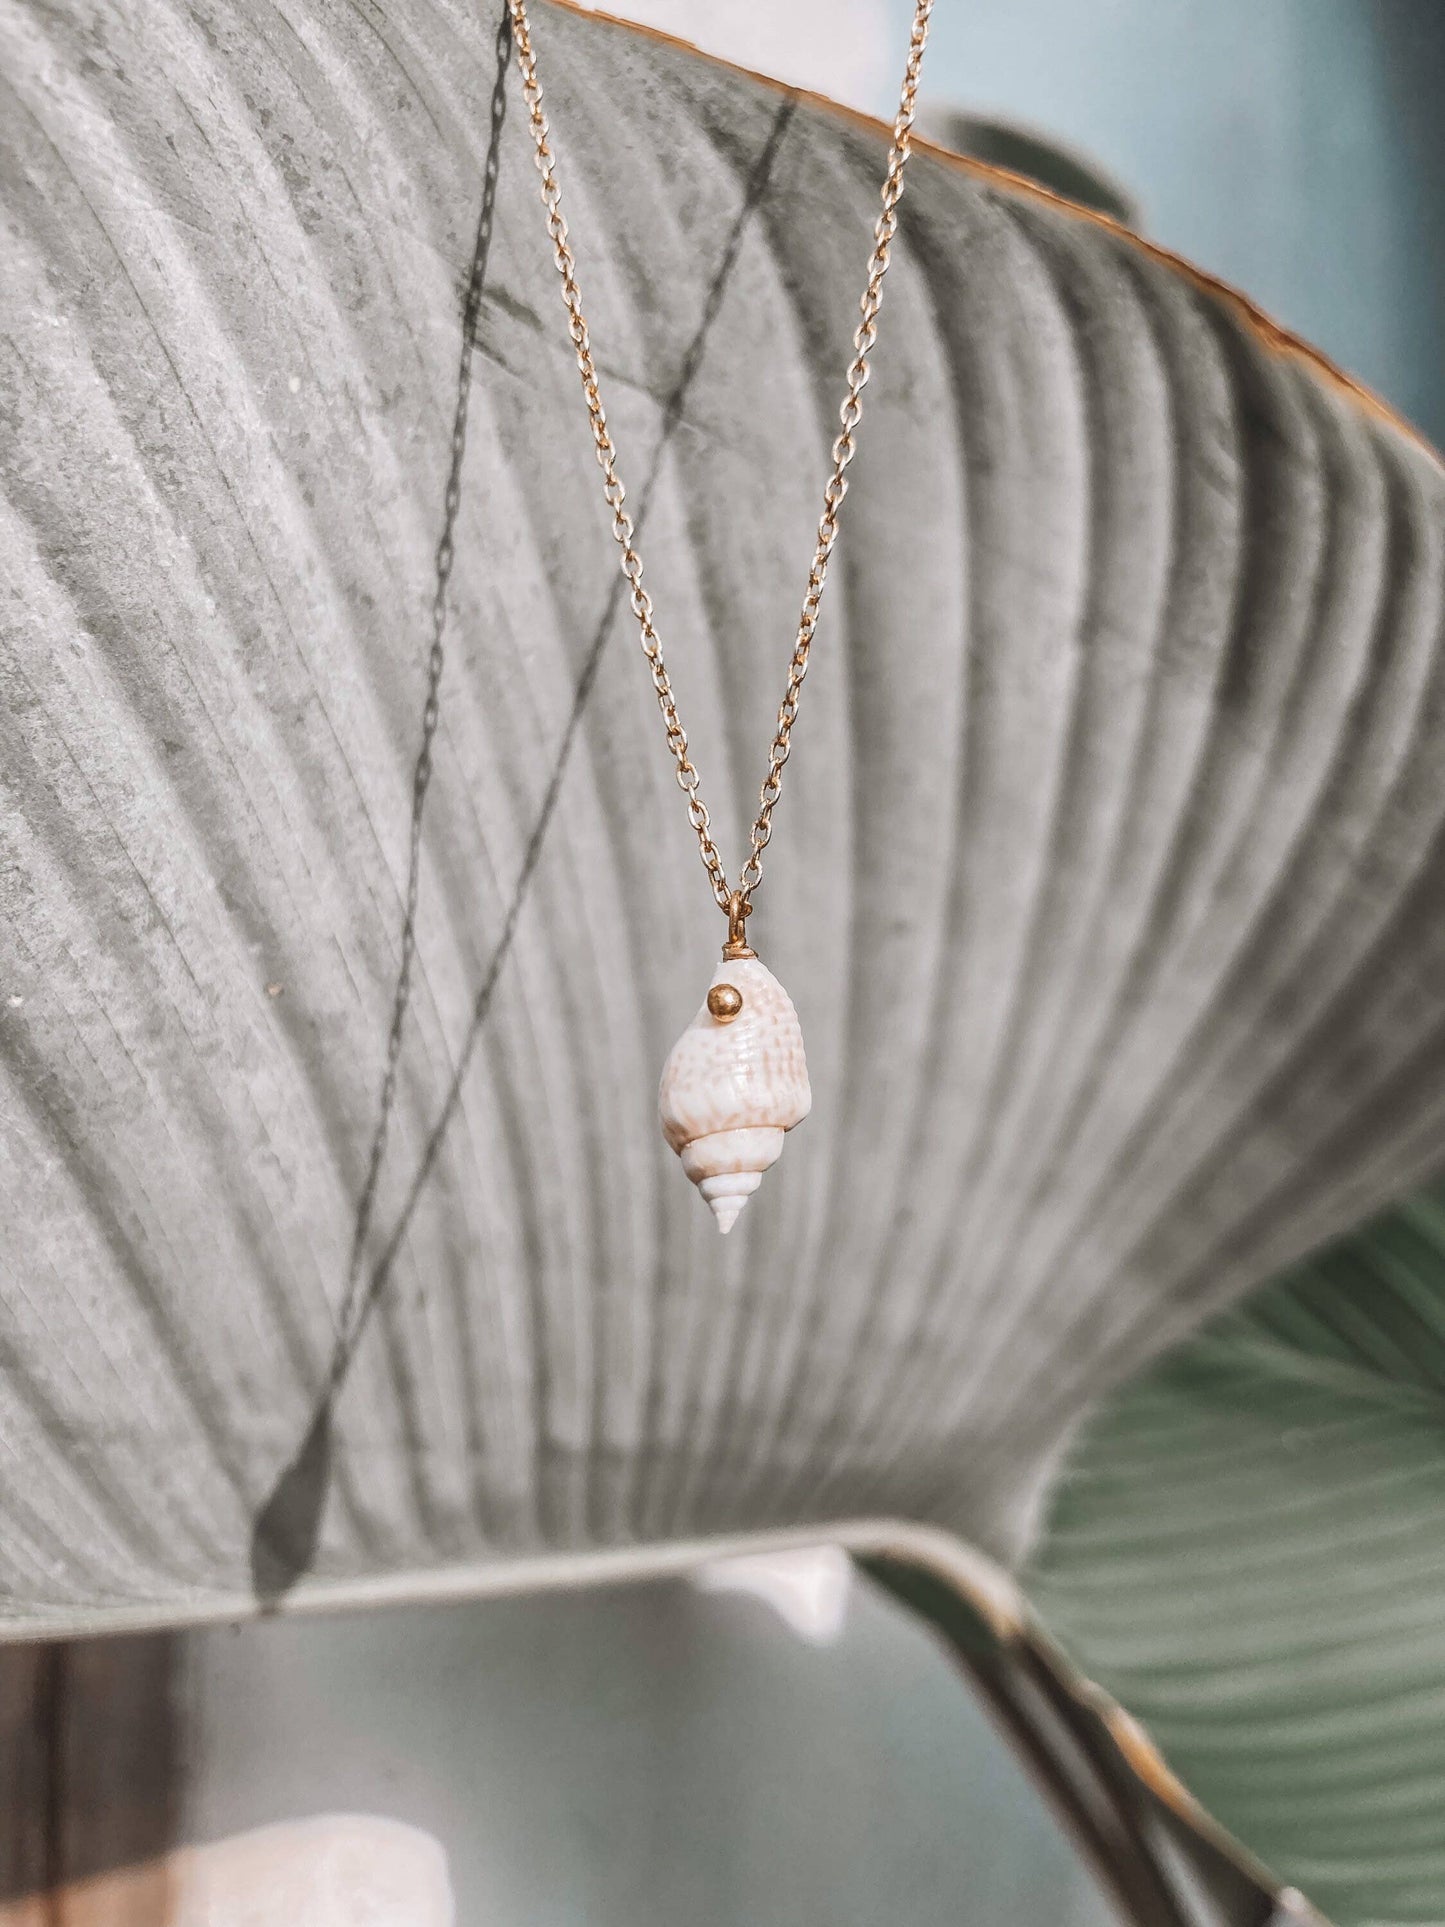 Mermaid Long Spiral Shell Necklace